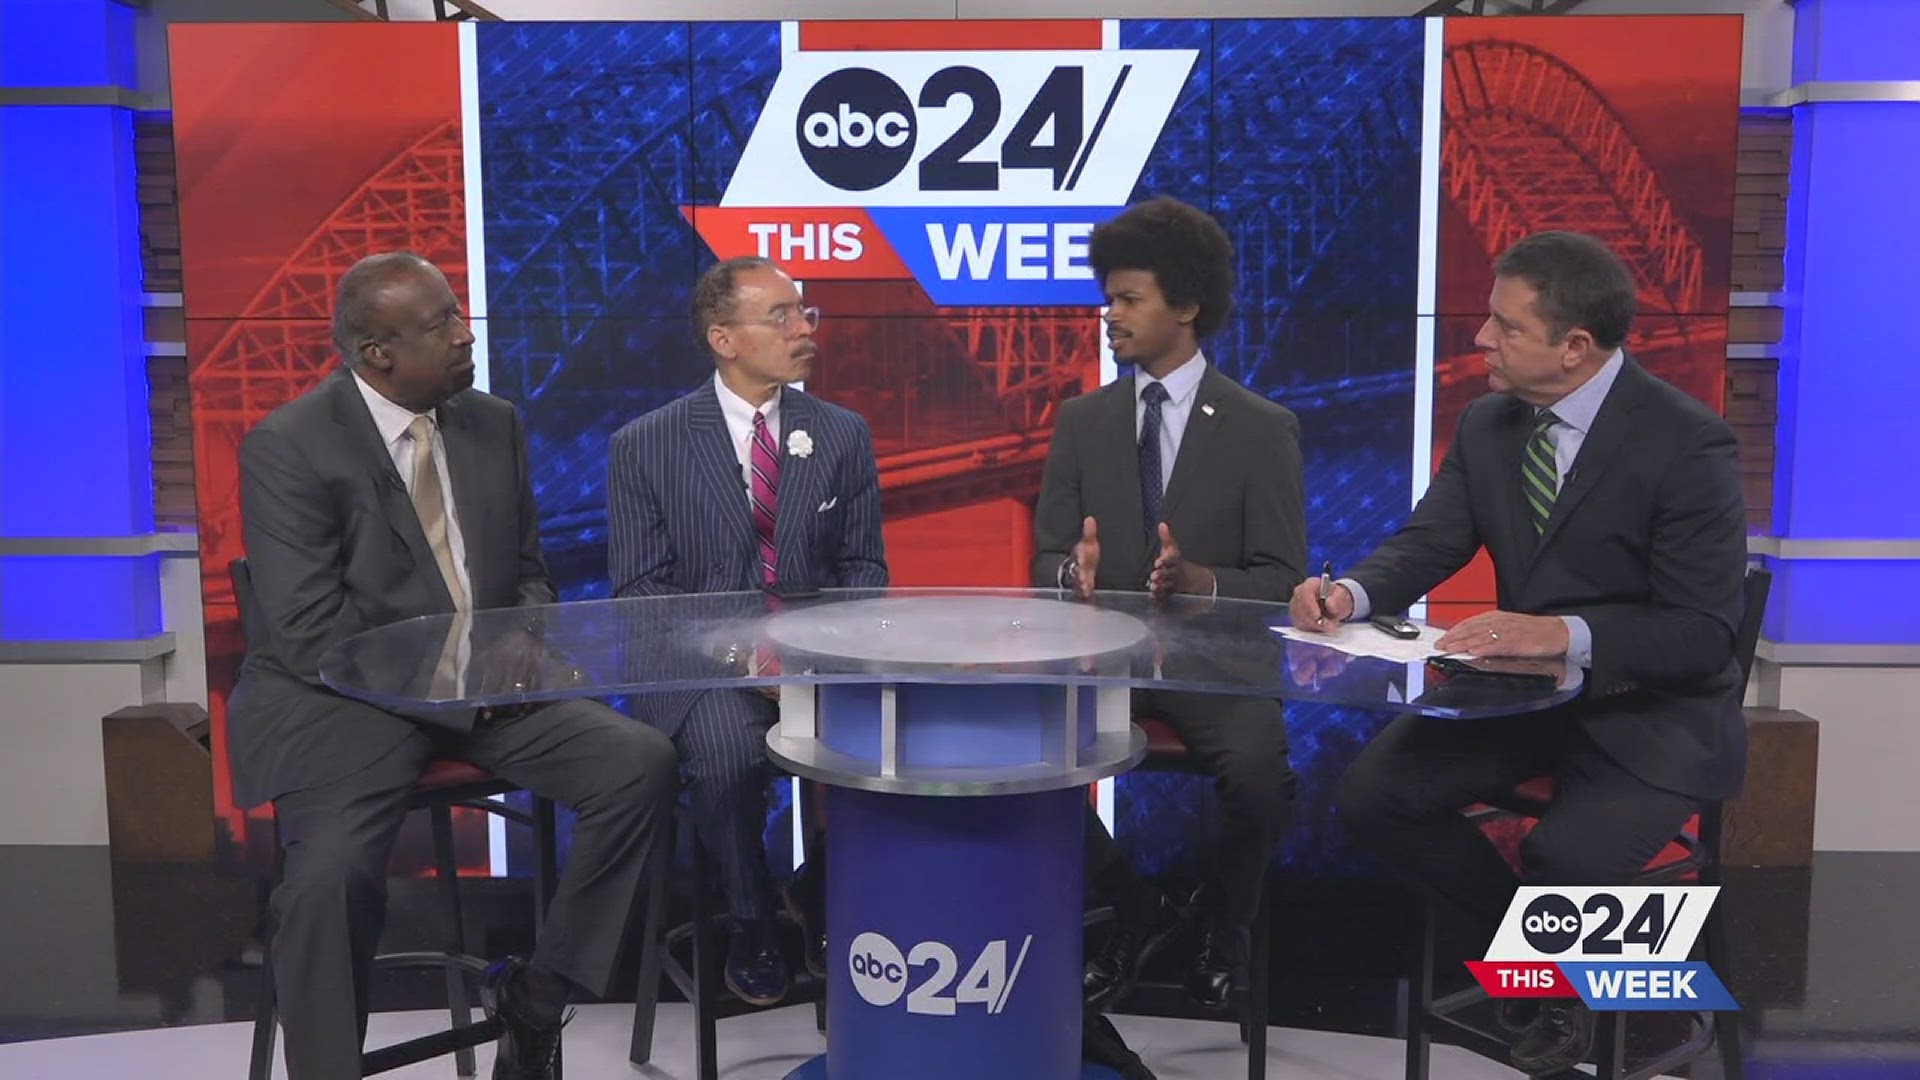 Speaking to ABC24 This Week, District 86 Representative Justin Pearson discusses what he looks for in mayoral candidates, rumors regarding higher ambitions and more.